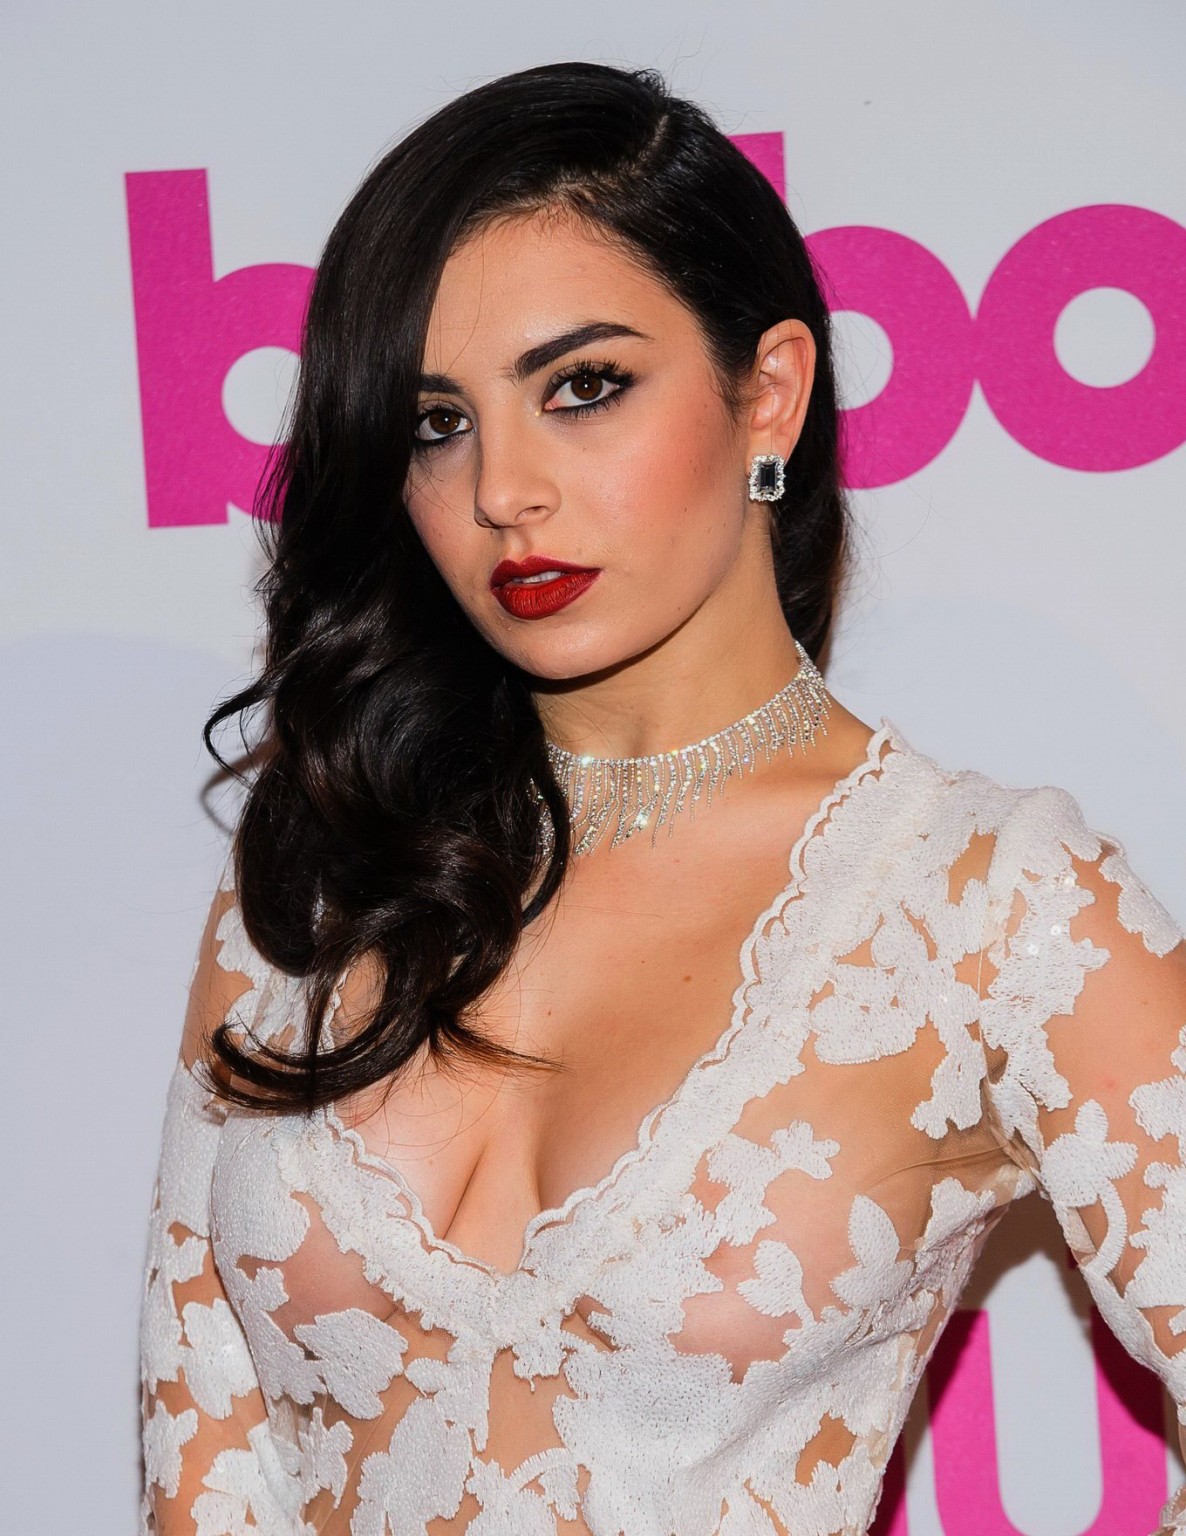 Charli XCX flashing her big boobs and panties under a white sheer dress at 2014  #75178438